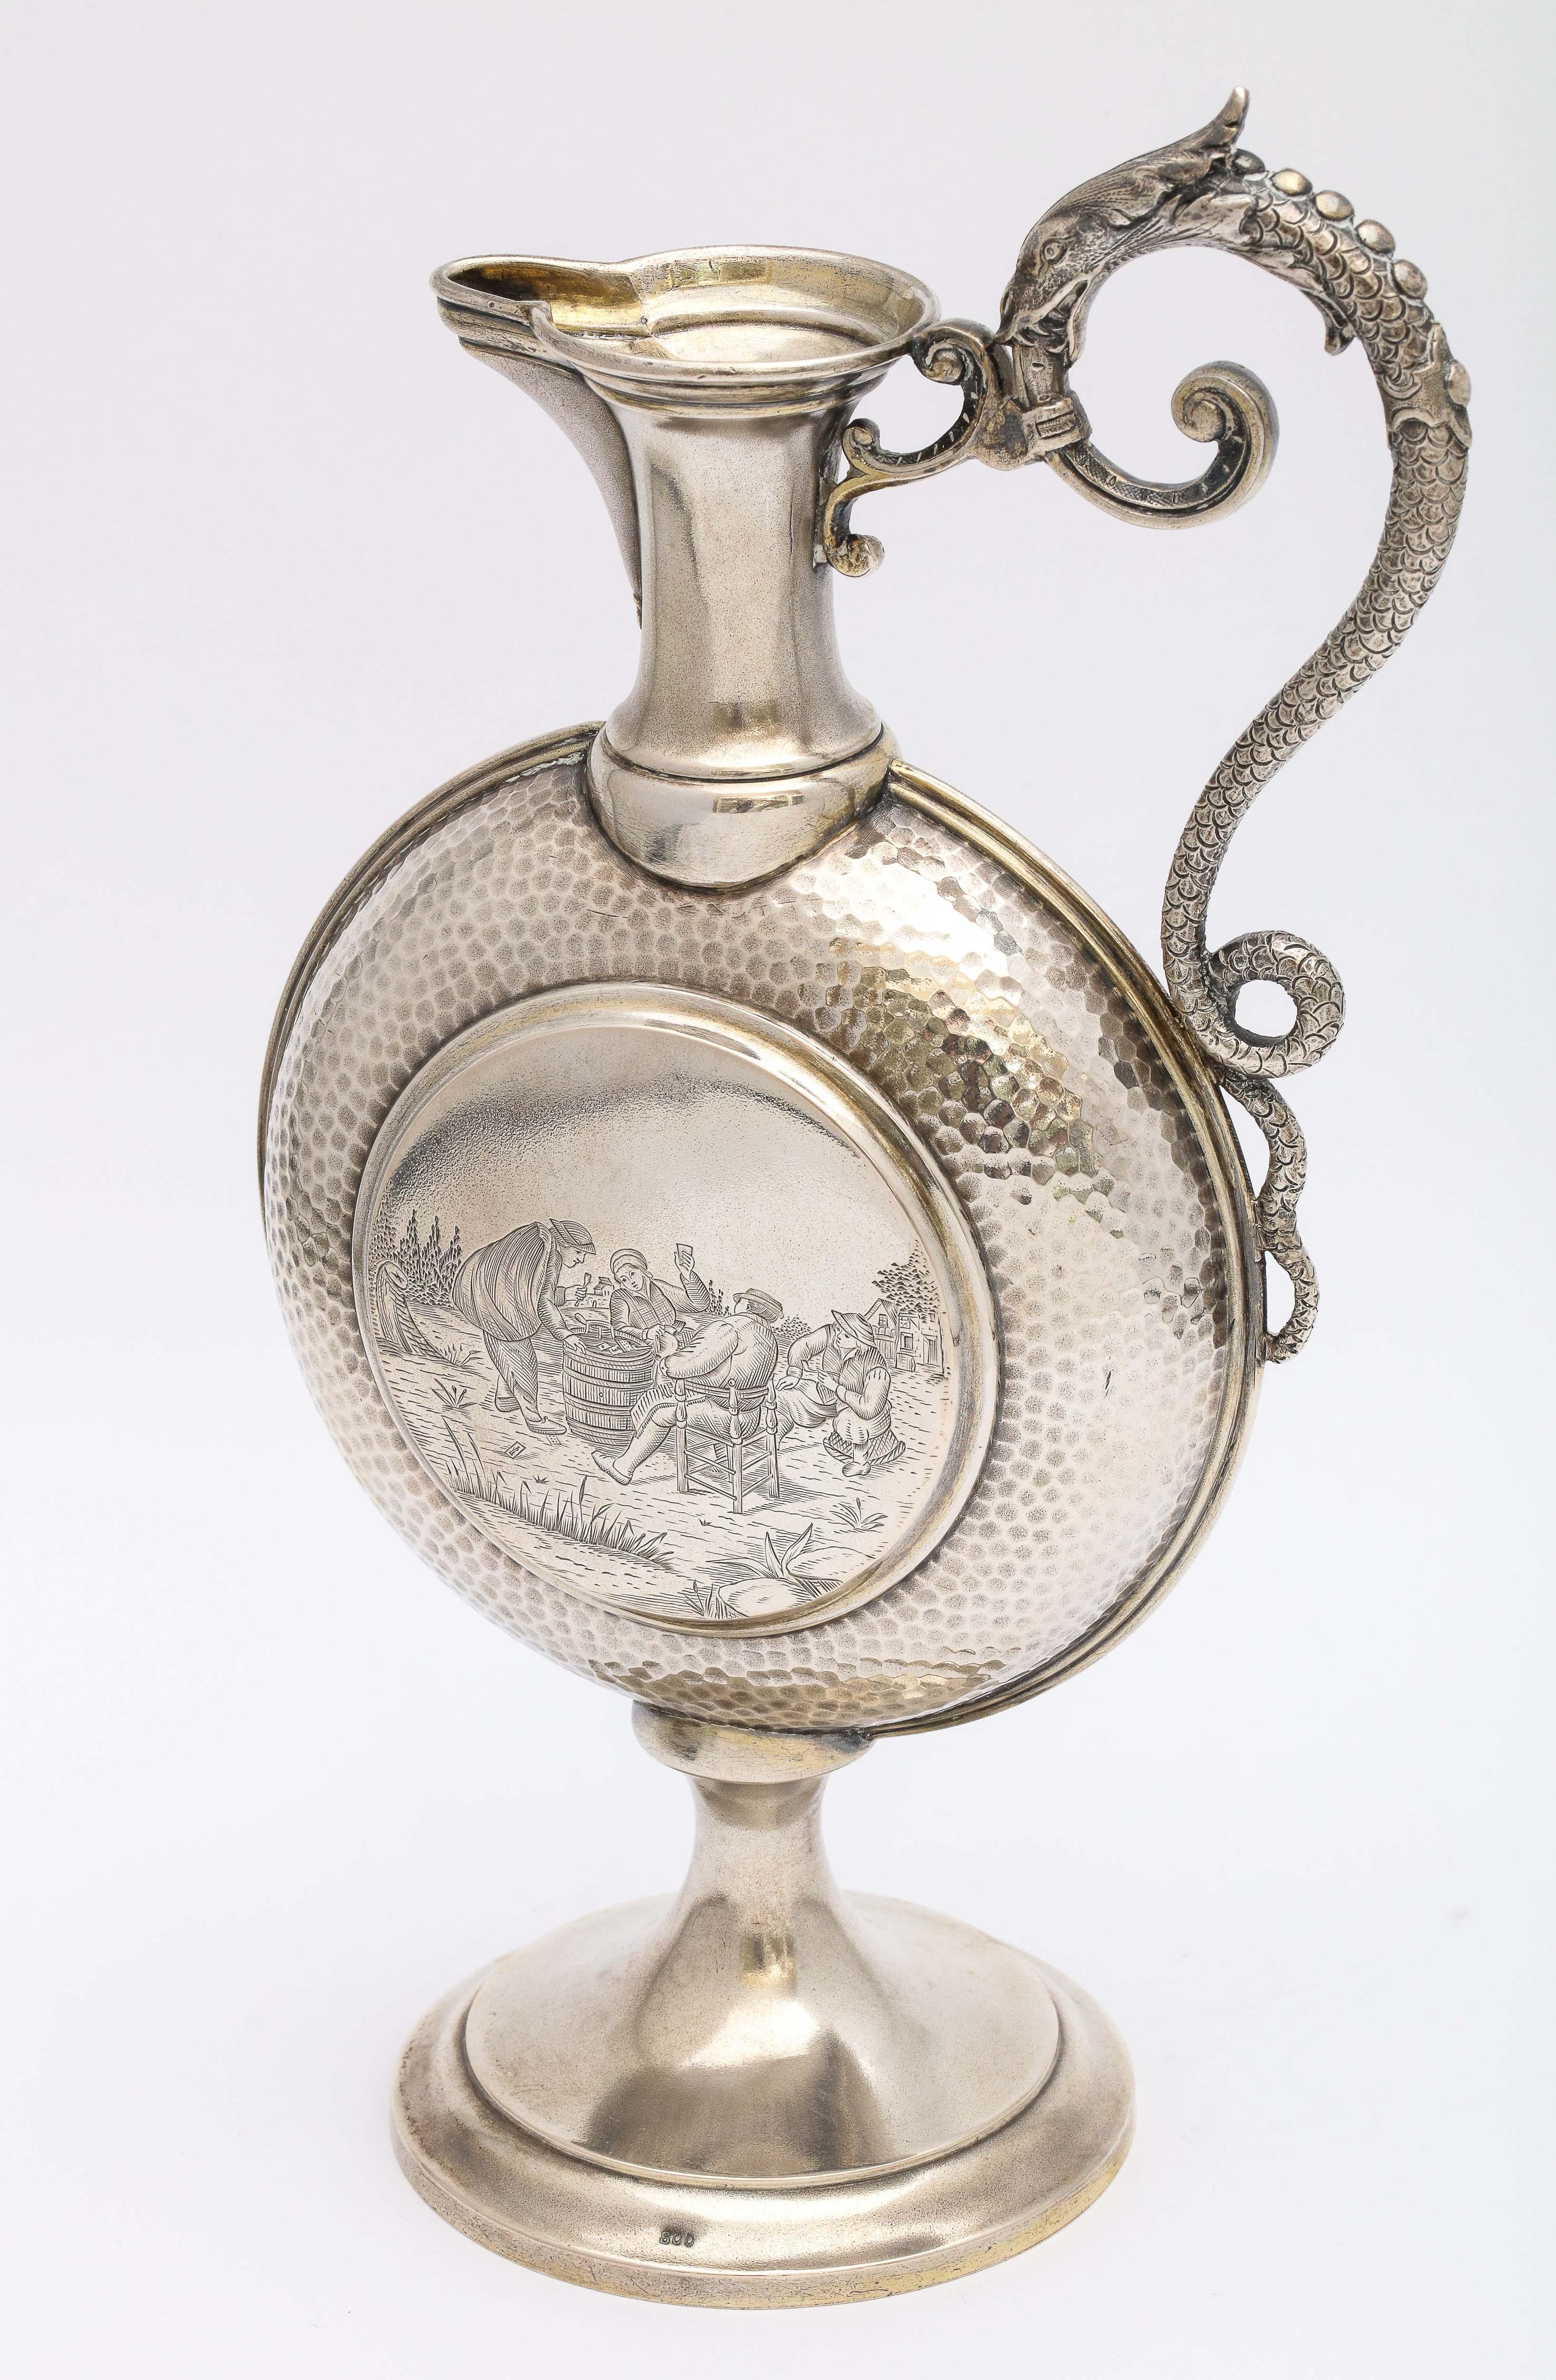 Neoclassical Revival Neoclassical Style Continental Silver '.800' Ewer/Pitcher For Sale